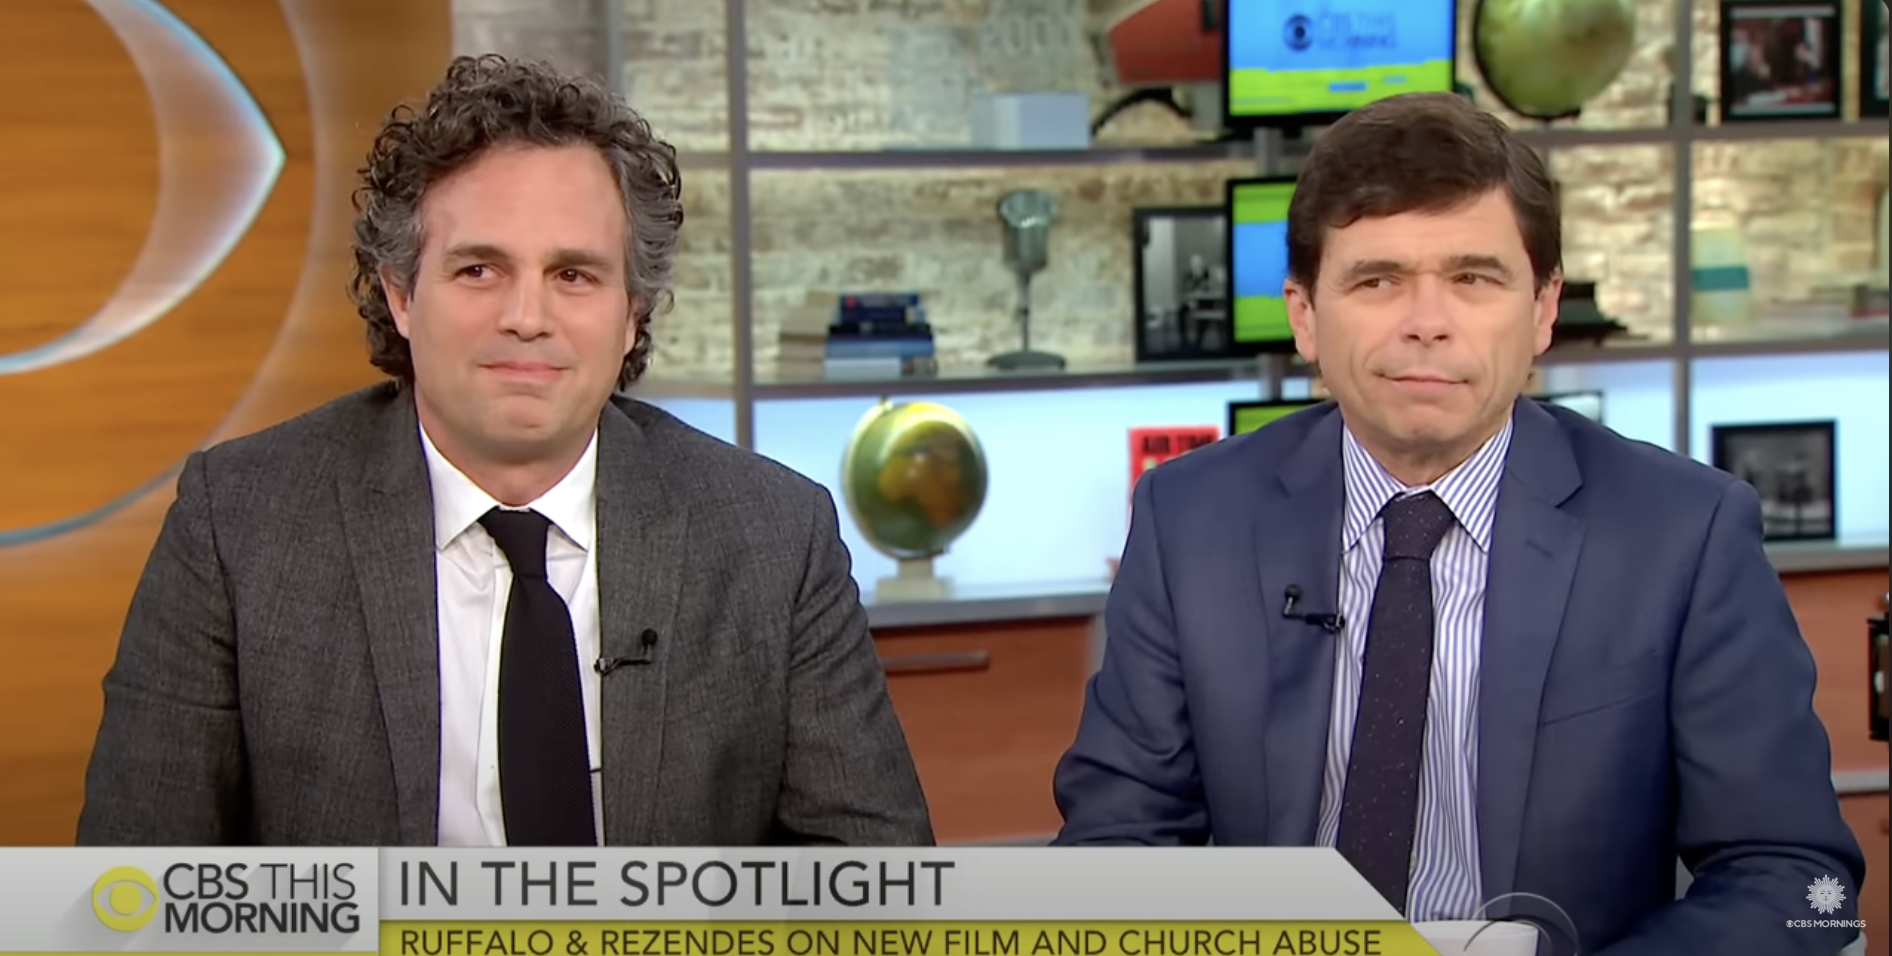 (L to R) Mark Ruffalo, and Michael Rezendes with CBS Mornings discussing "Spotlight" (2015), and The Boston Globe Pulitzer Prizing winning expose that Rezendes wrote in 2002, Ruffalo plays him in the 2015 film. Photo Credit: CBS Mornings